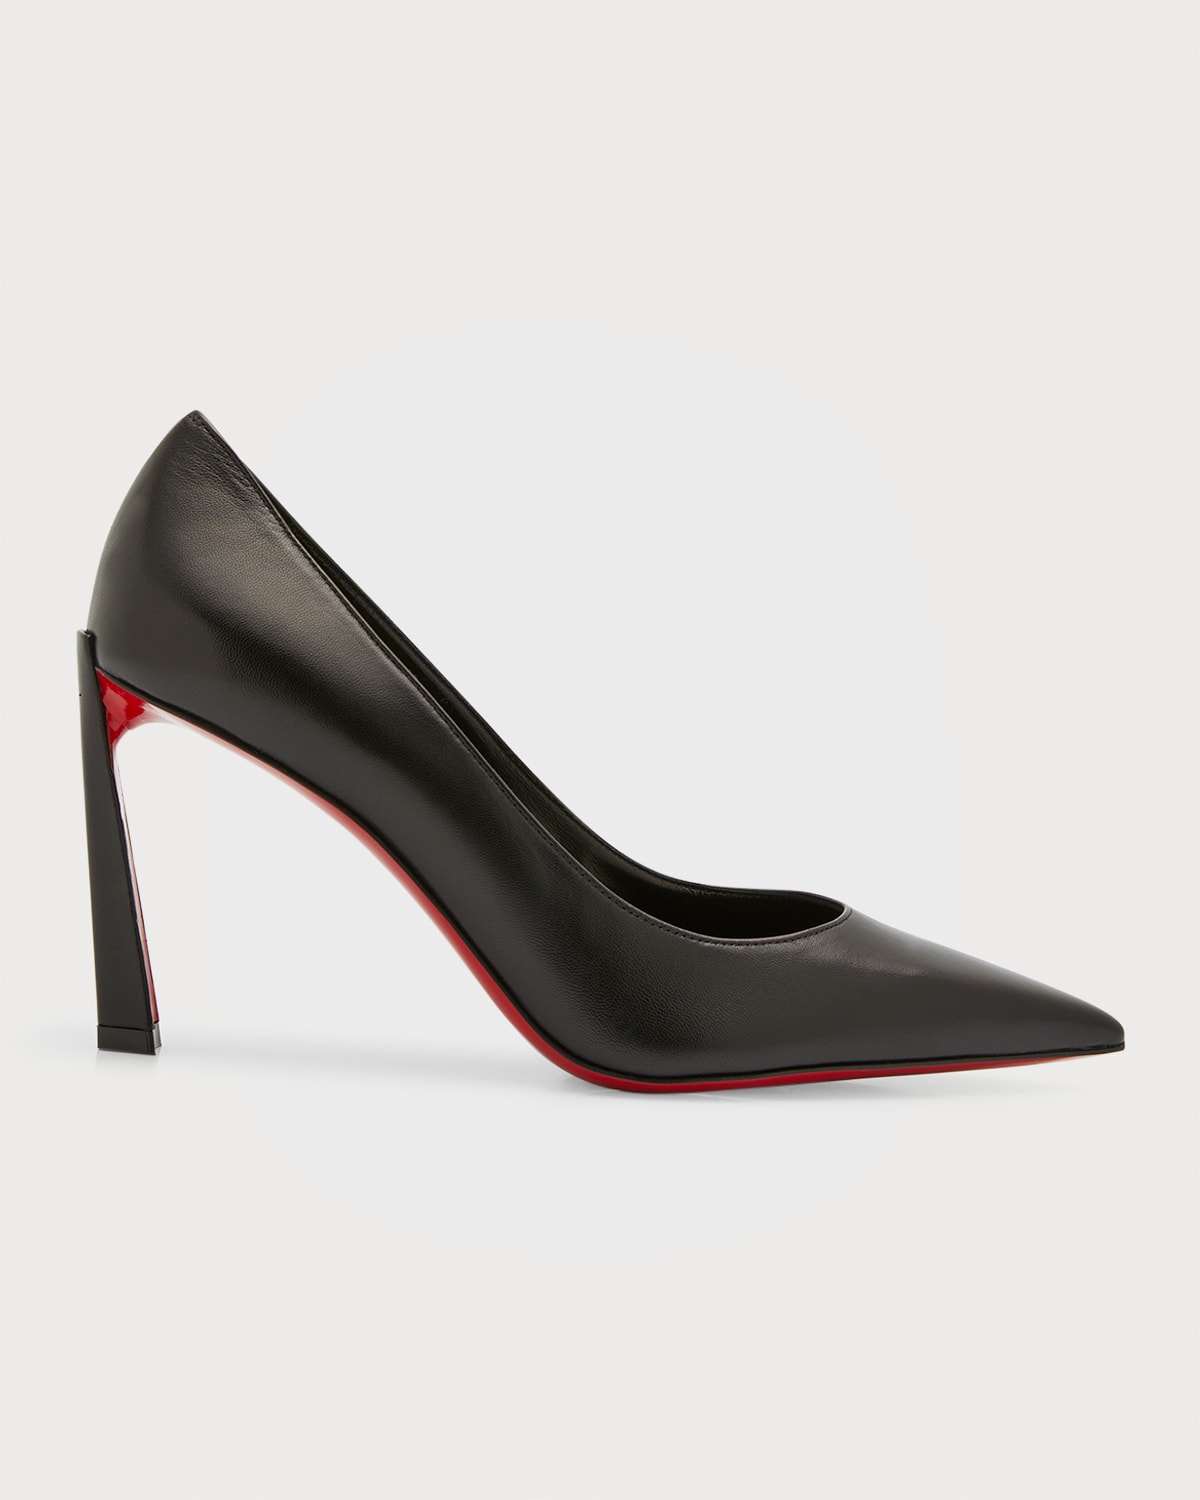 Christian Louboutin Condora Red Sole Pumps In Black